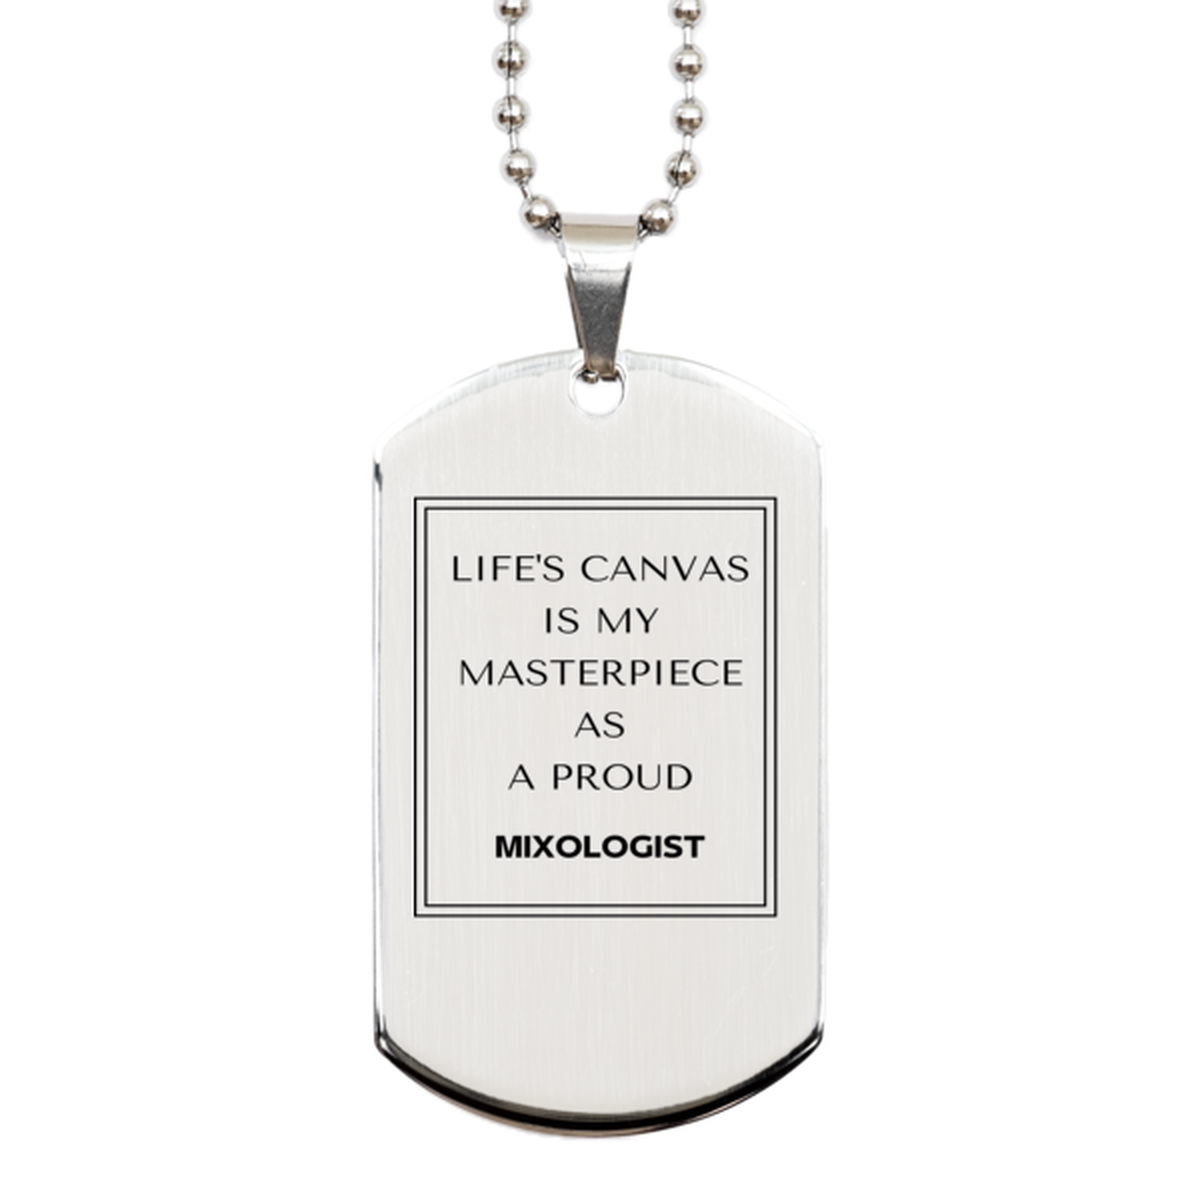 Proud Mixologist Gifts, Life's canvas is my masterpiece, Epic Birthday Christmas Unique Silver Dog Tag For Mixologist, Coworkers, Men, Women, Friends